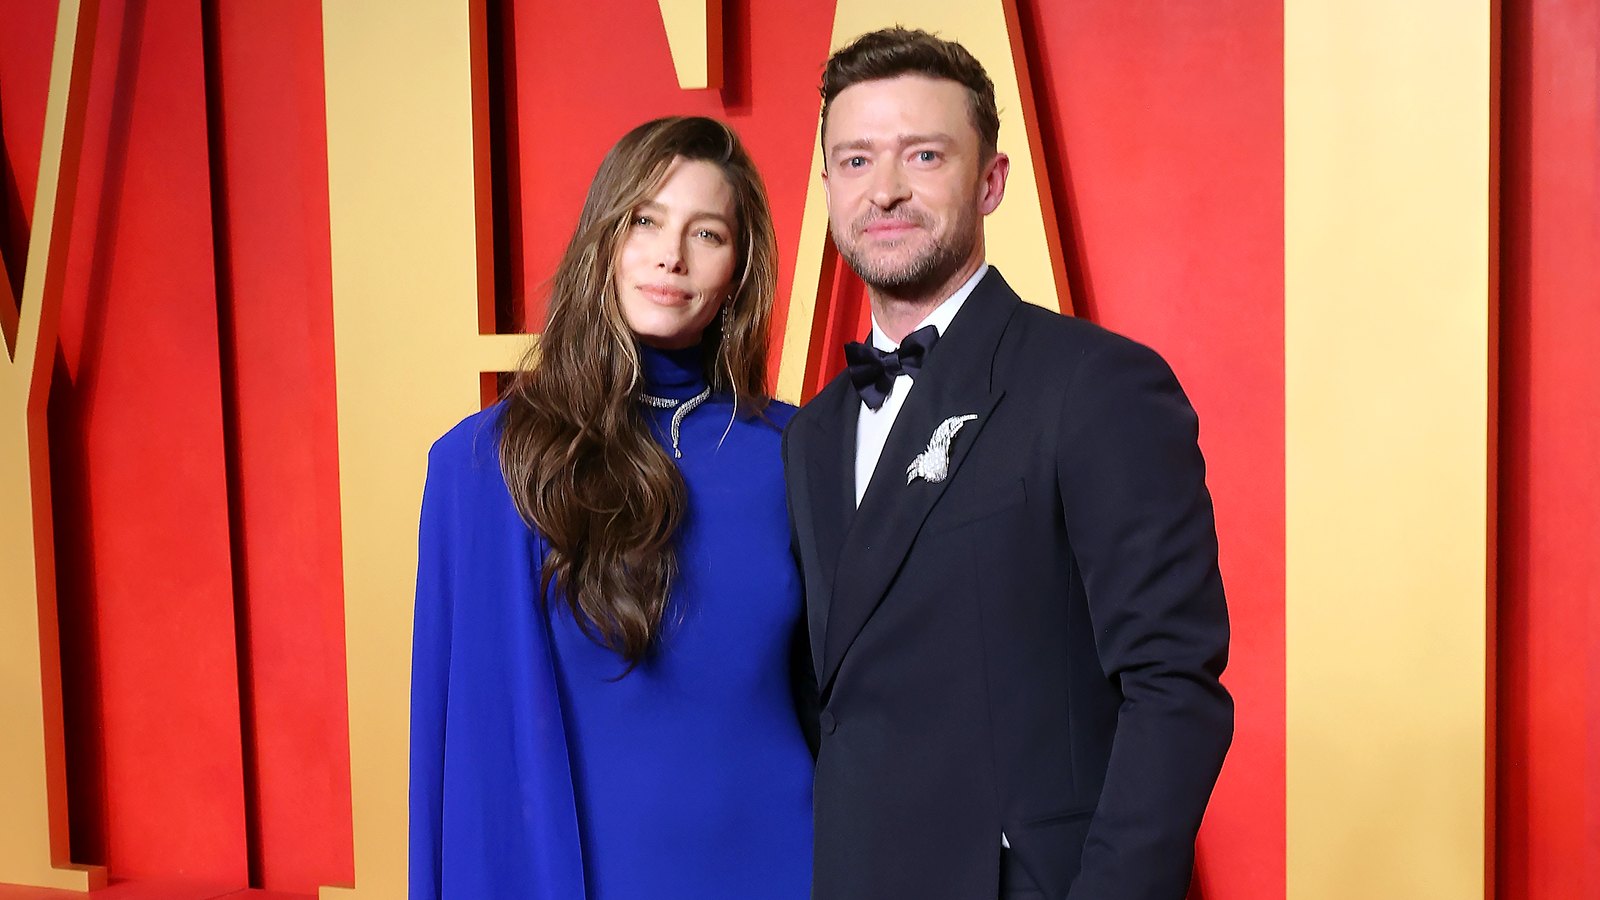 Feature Justin Timberlake Shares Video of Jessica Biel at Concert After DWI Drama